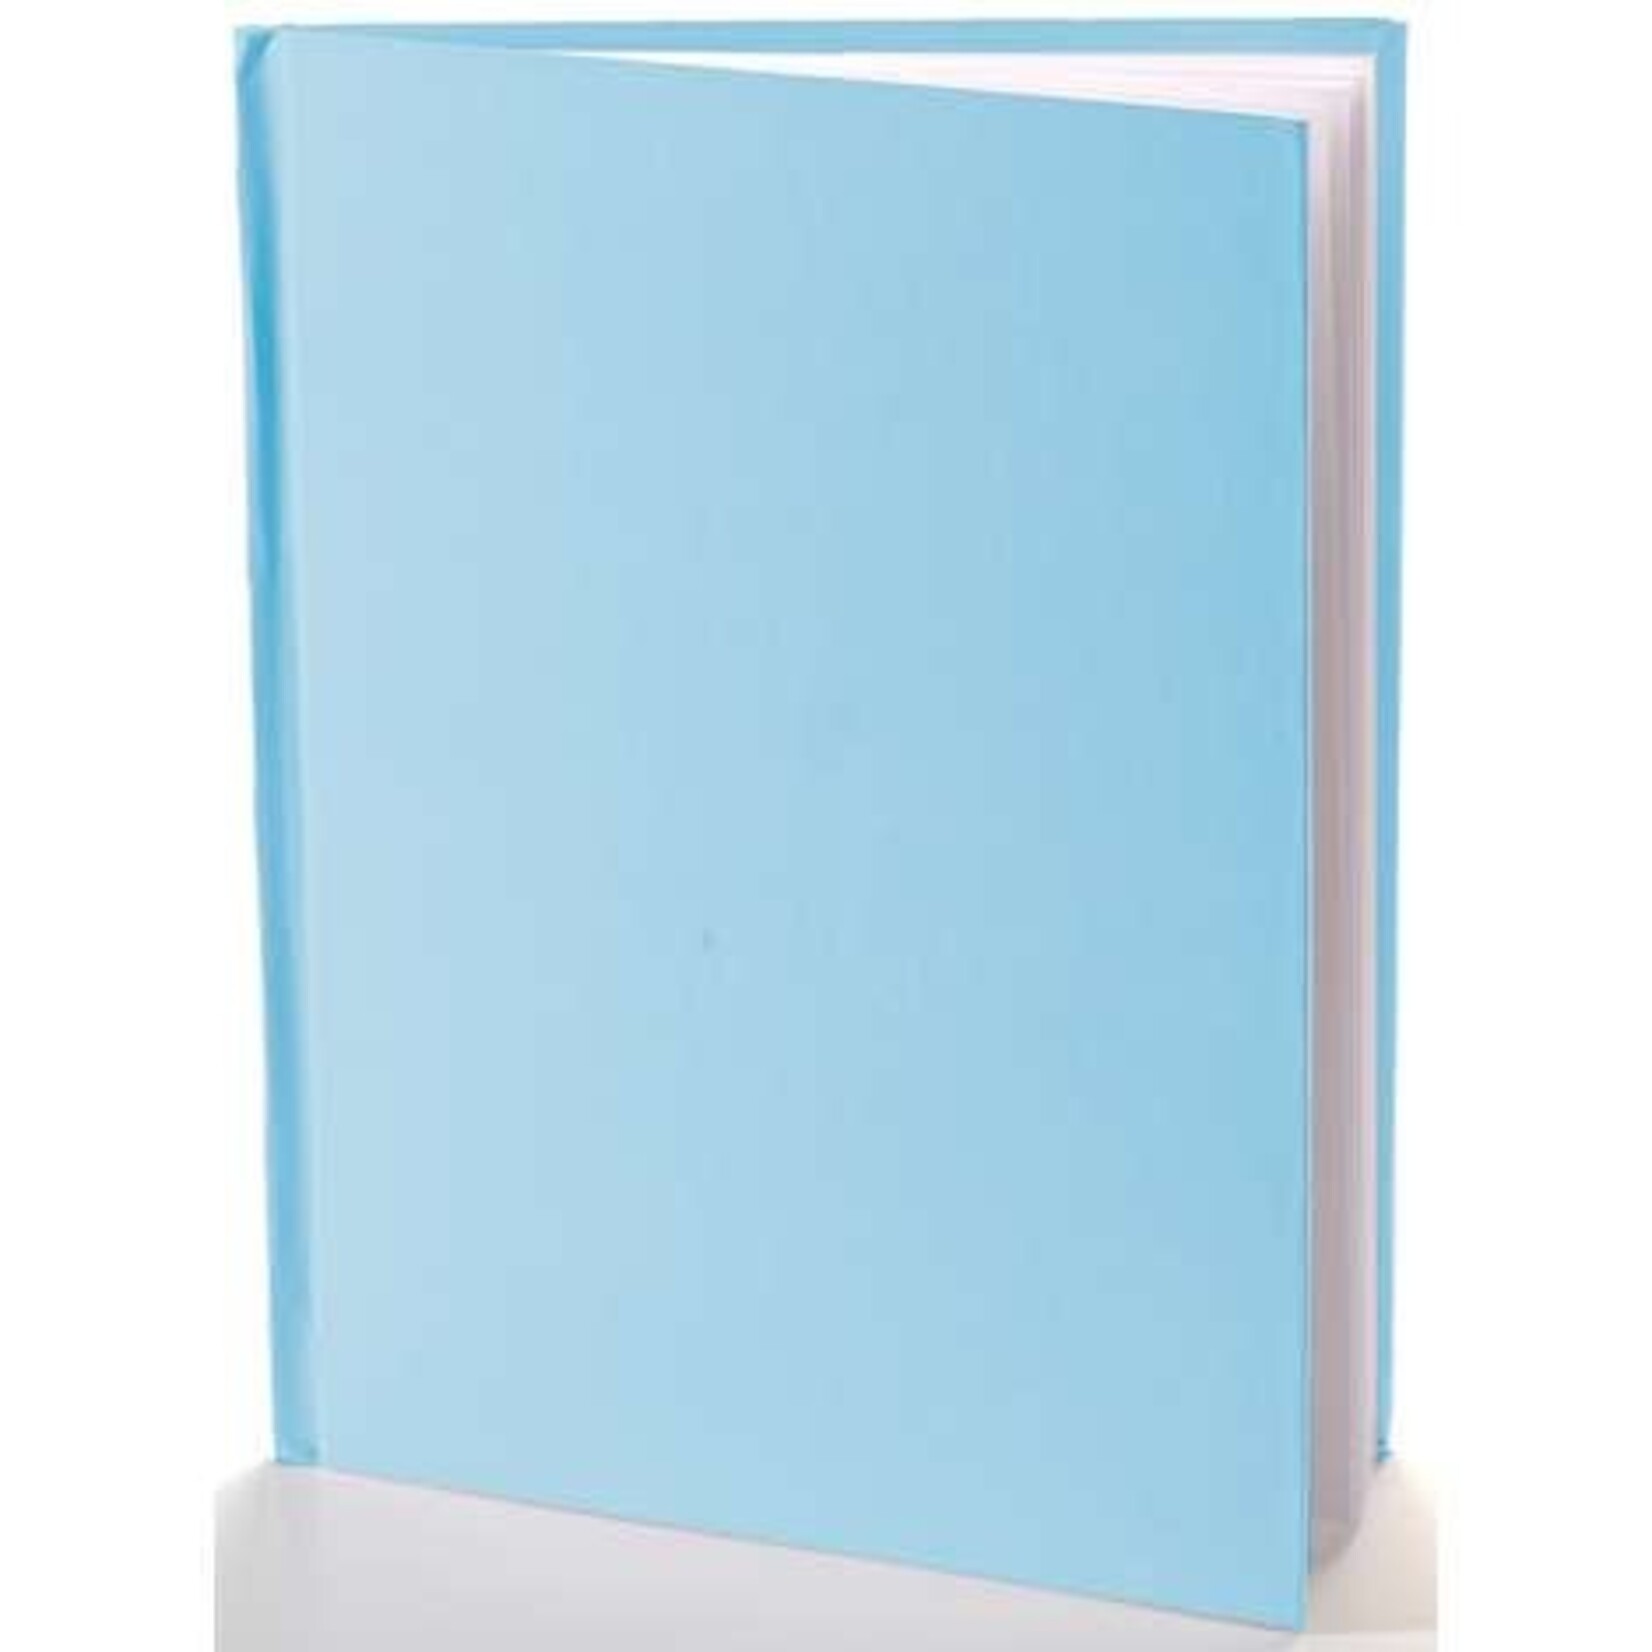 ASHLEY INCORPORATED Blank Hardcover Book, Portrait, 8.5" X 11", Blue